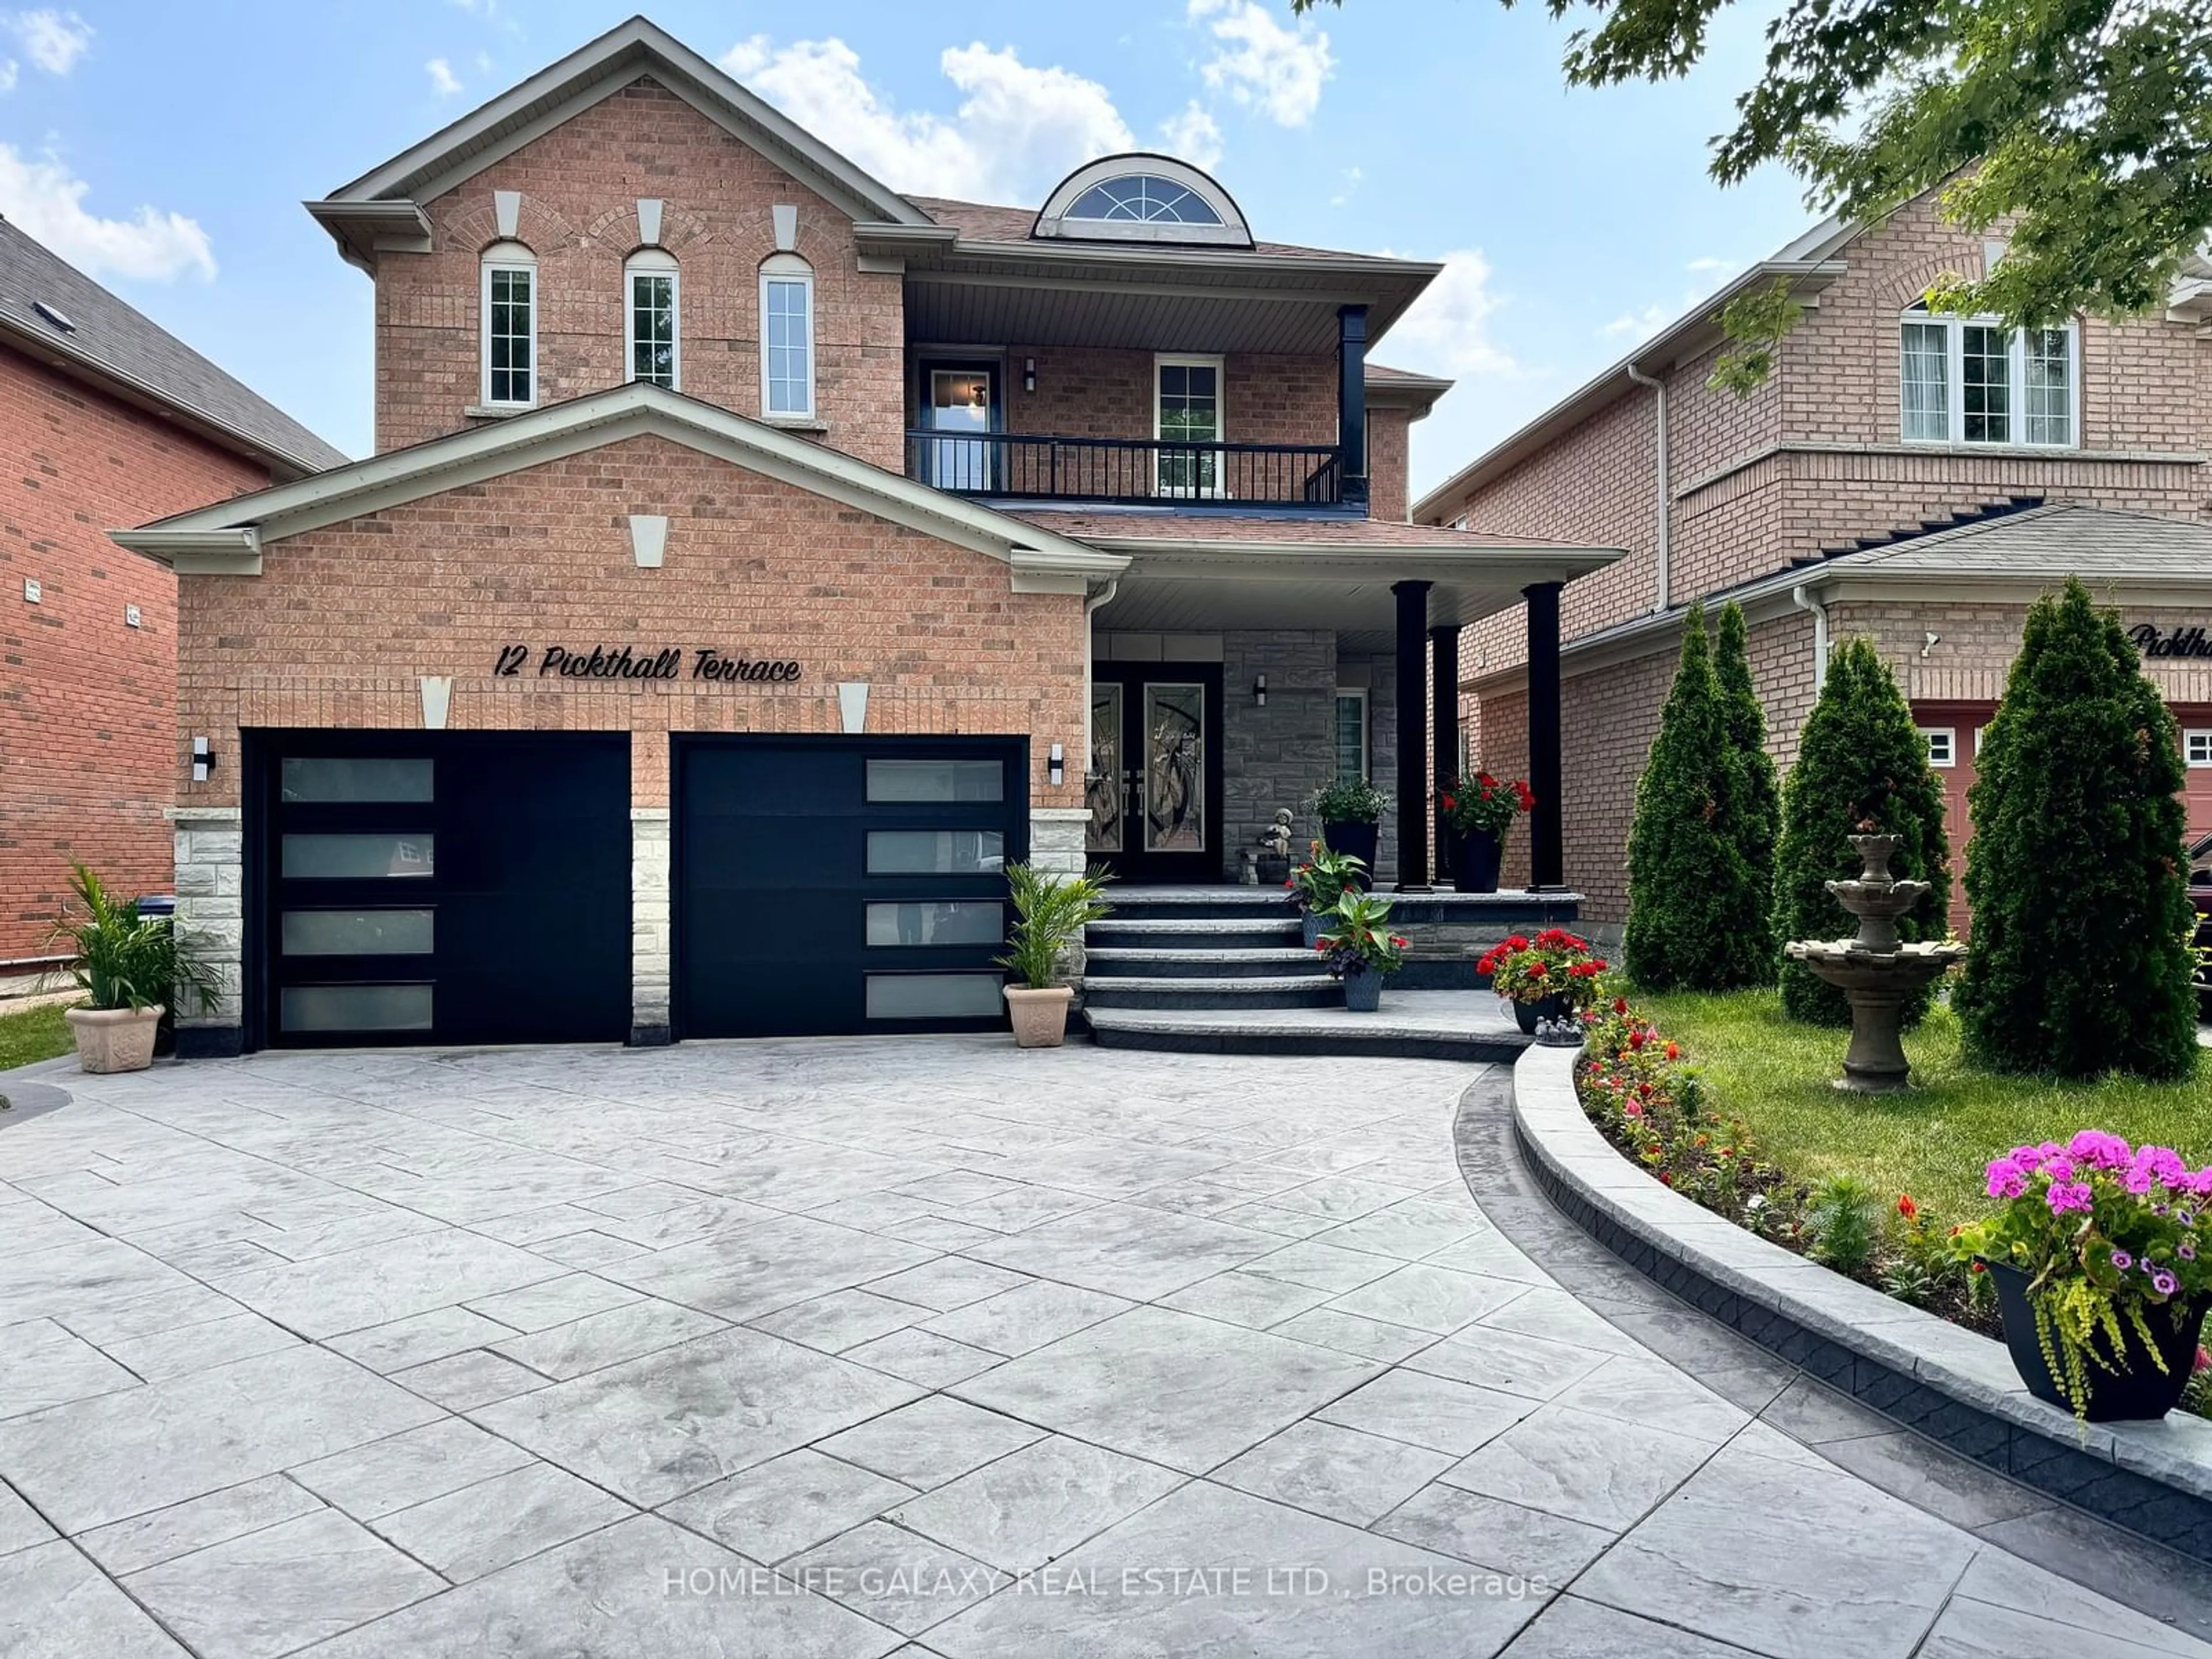 Home with brick exterior material for 12 Pickthall Terr, Toronto Ontario M1E 5K9